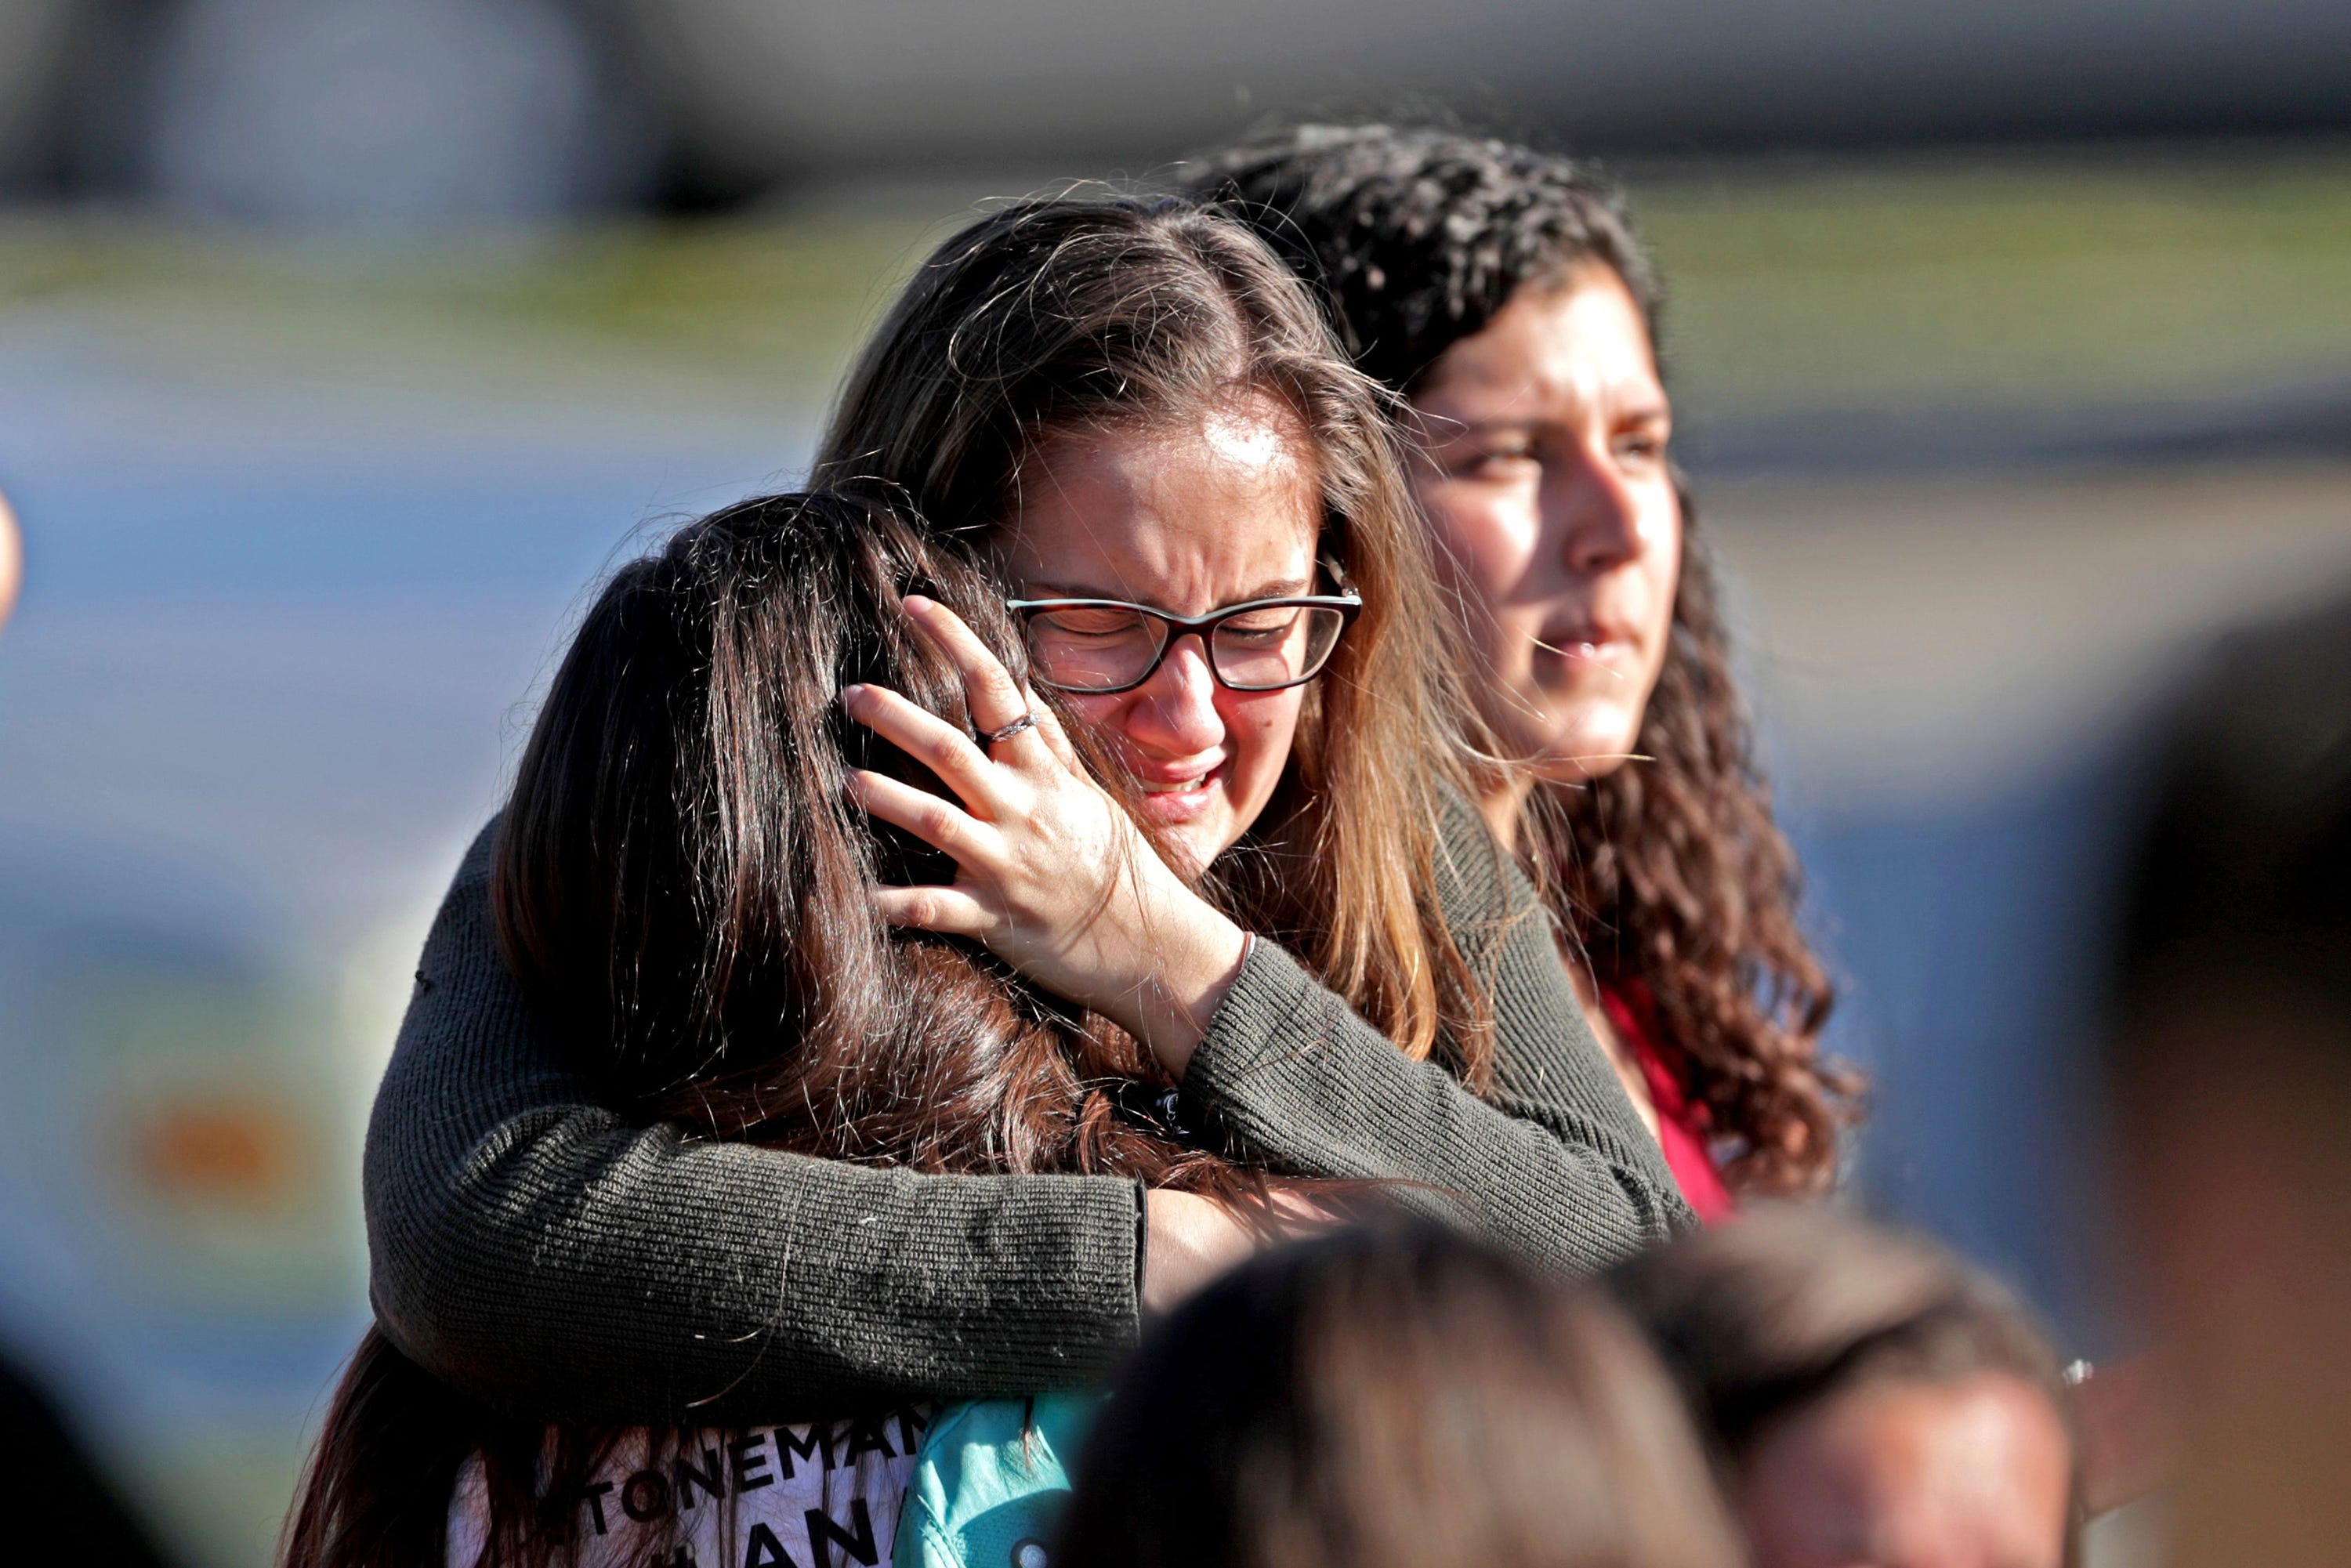 &apos;The most horrible thing they can go through&apos;: Florida shooting a grim reminder for Kentucky high school